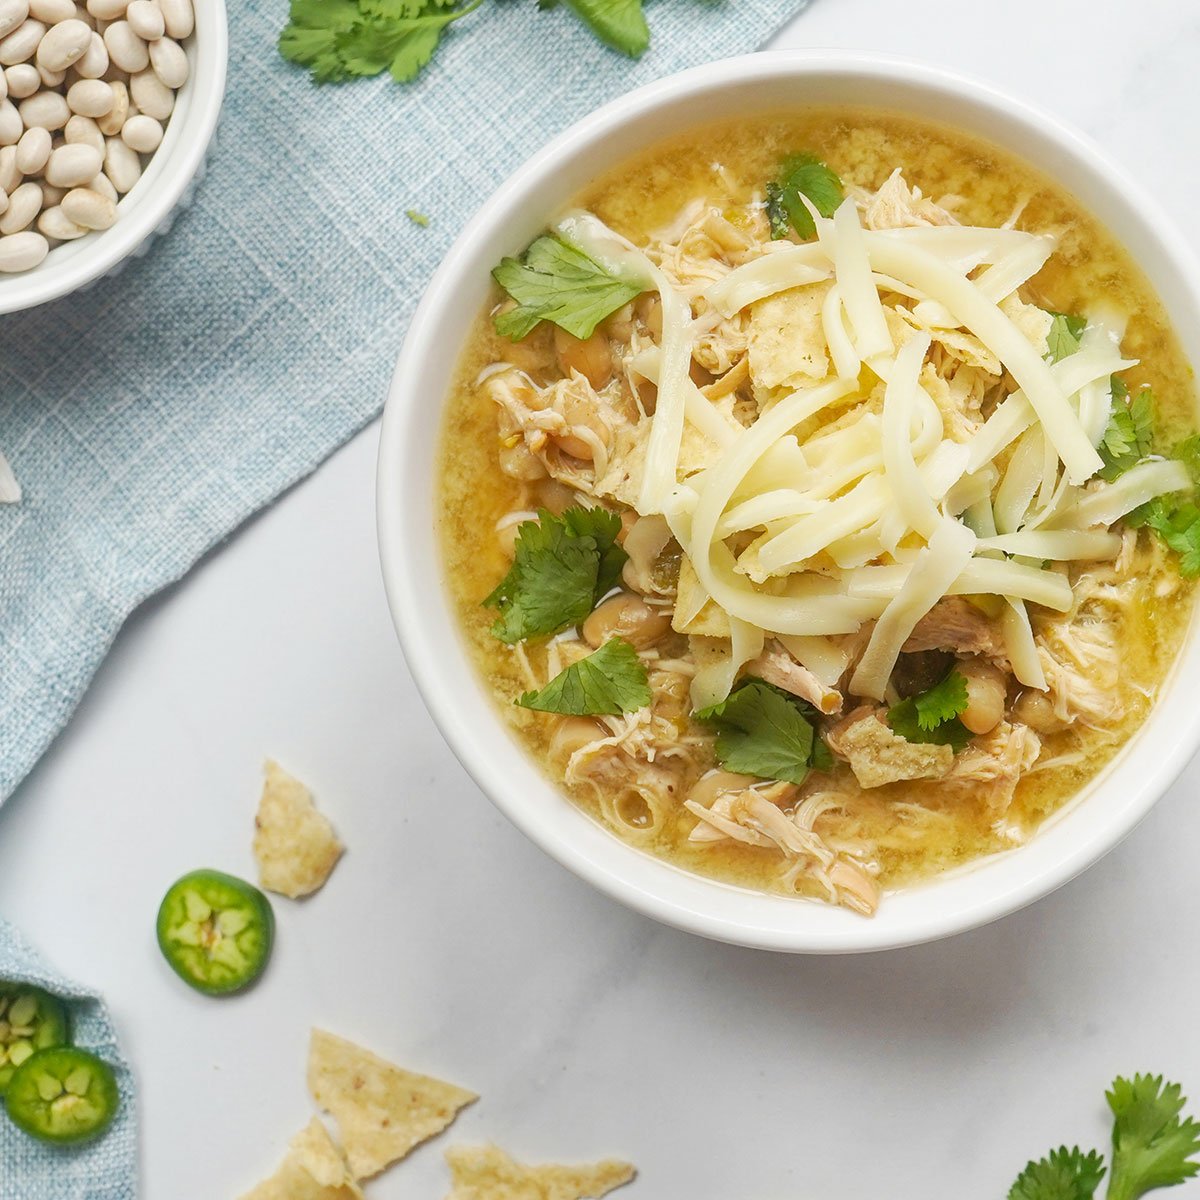 https://www.fivehearthome.com/wp-content/uploads/2022/11/White-Bean-Chicken-Chili-by-Five-Heart-Home_1200pxFeartured60.jpg